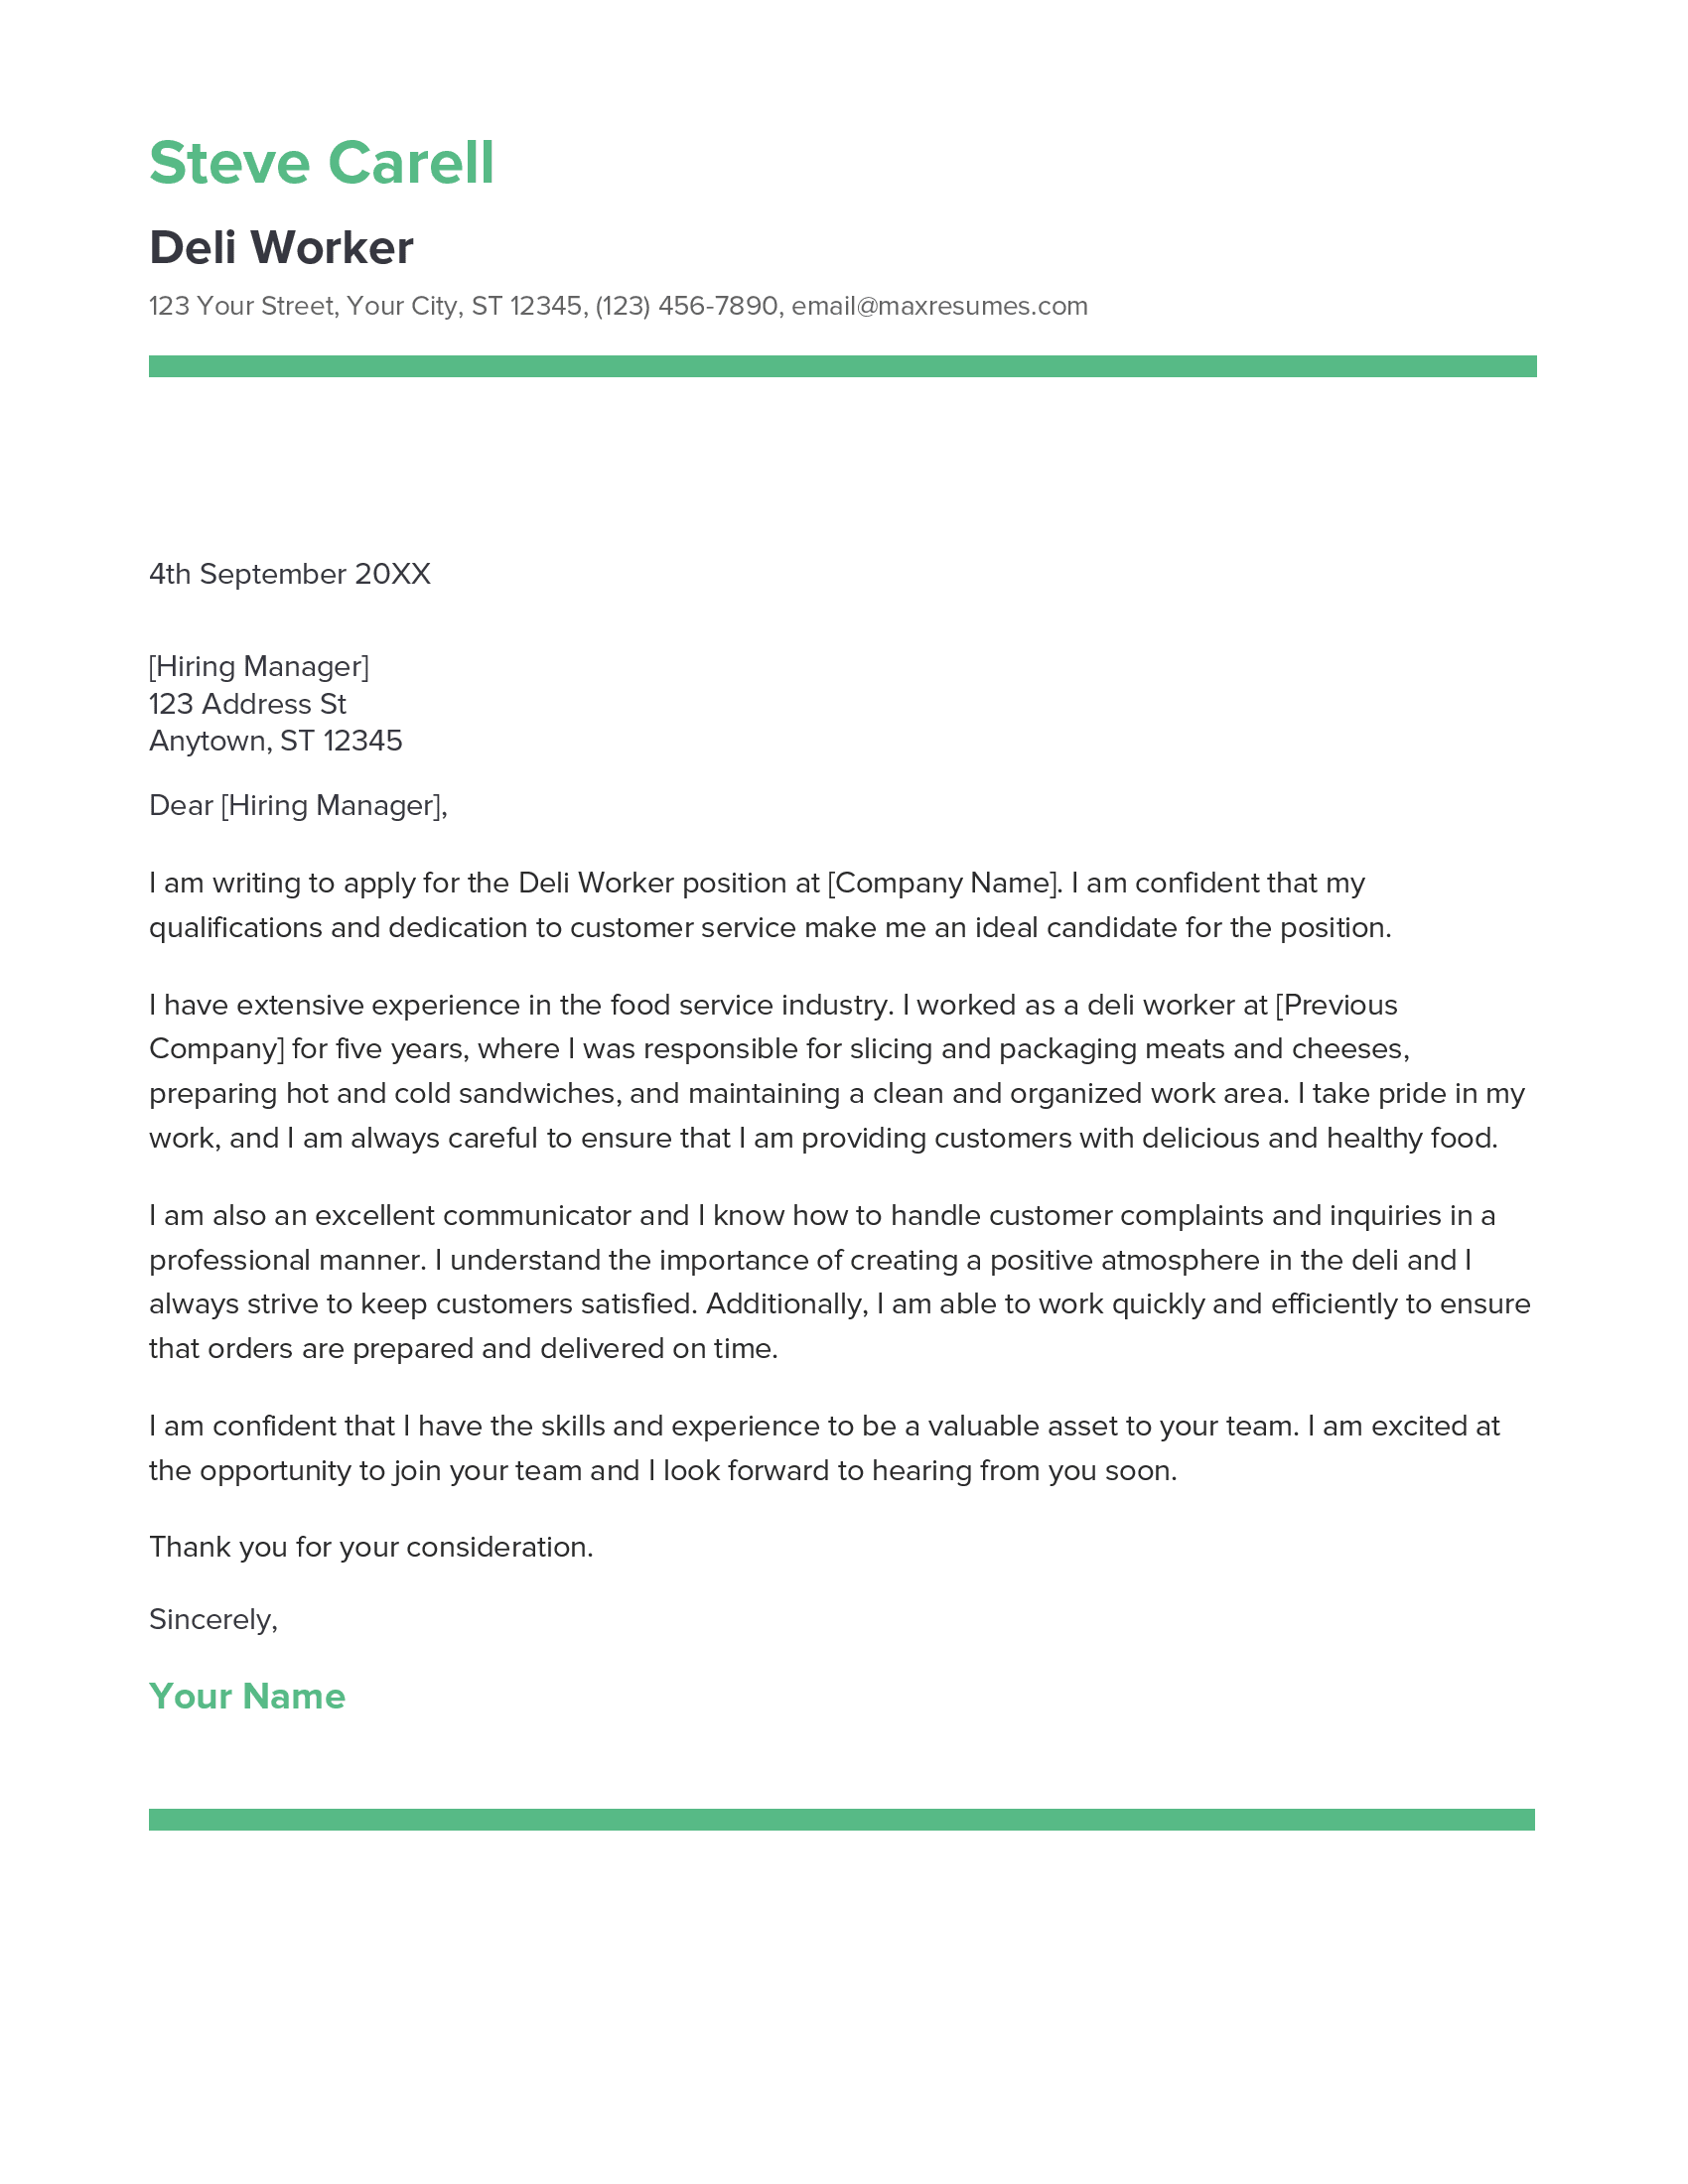 Deli Worker Cover Letter Example